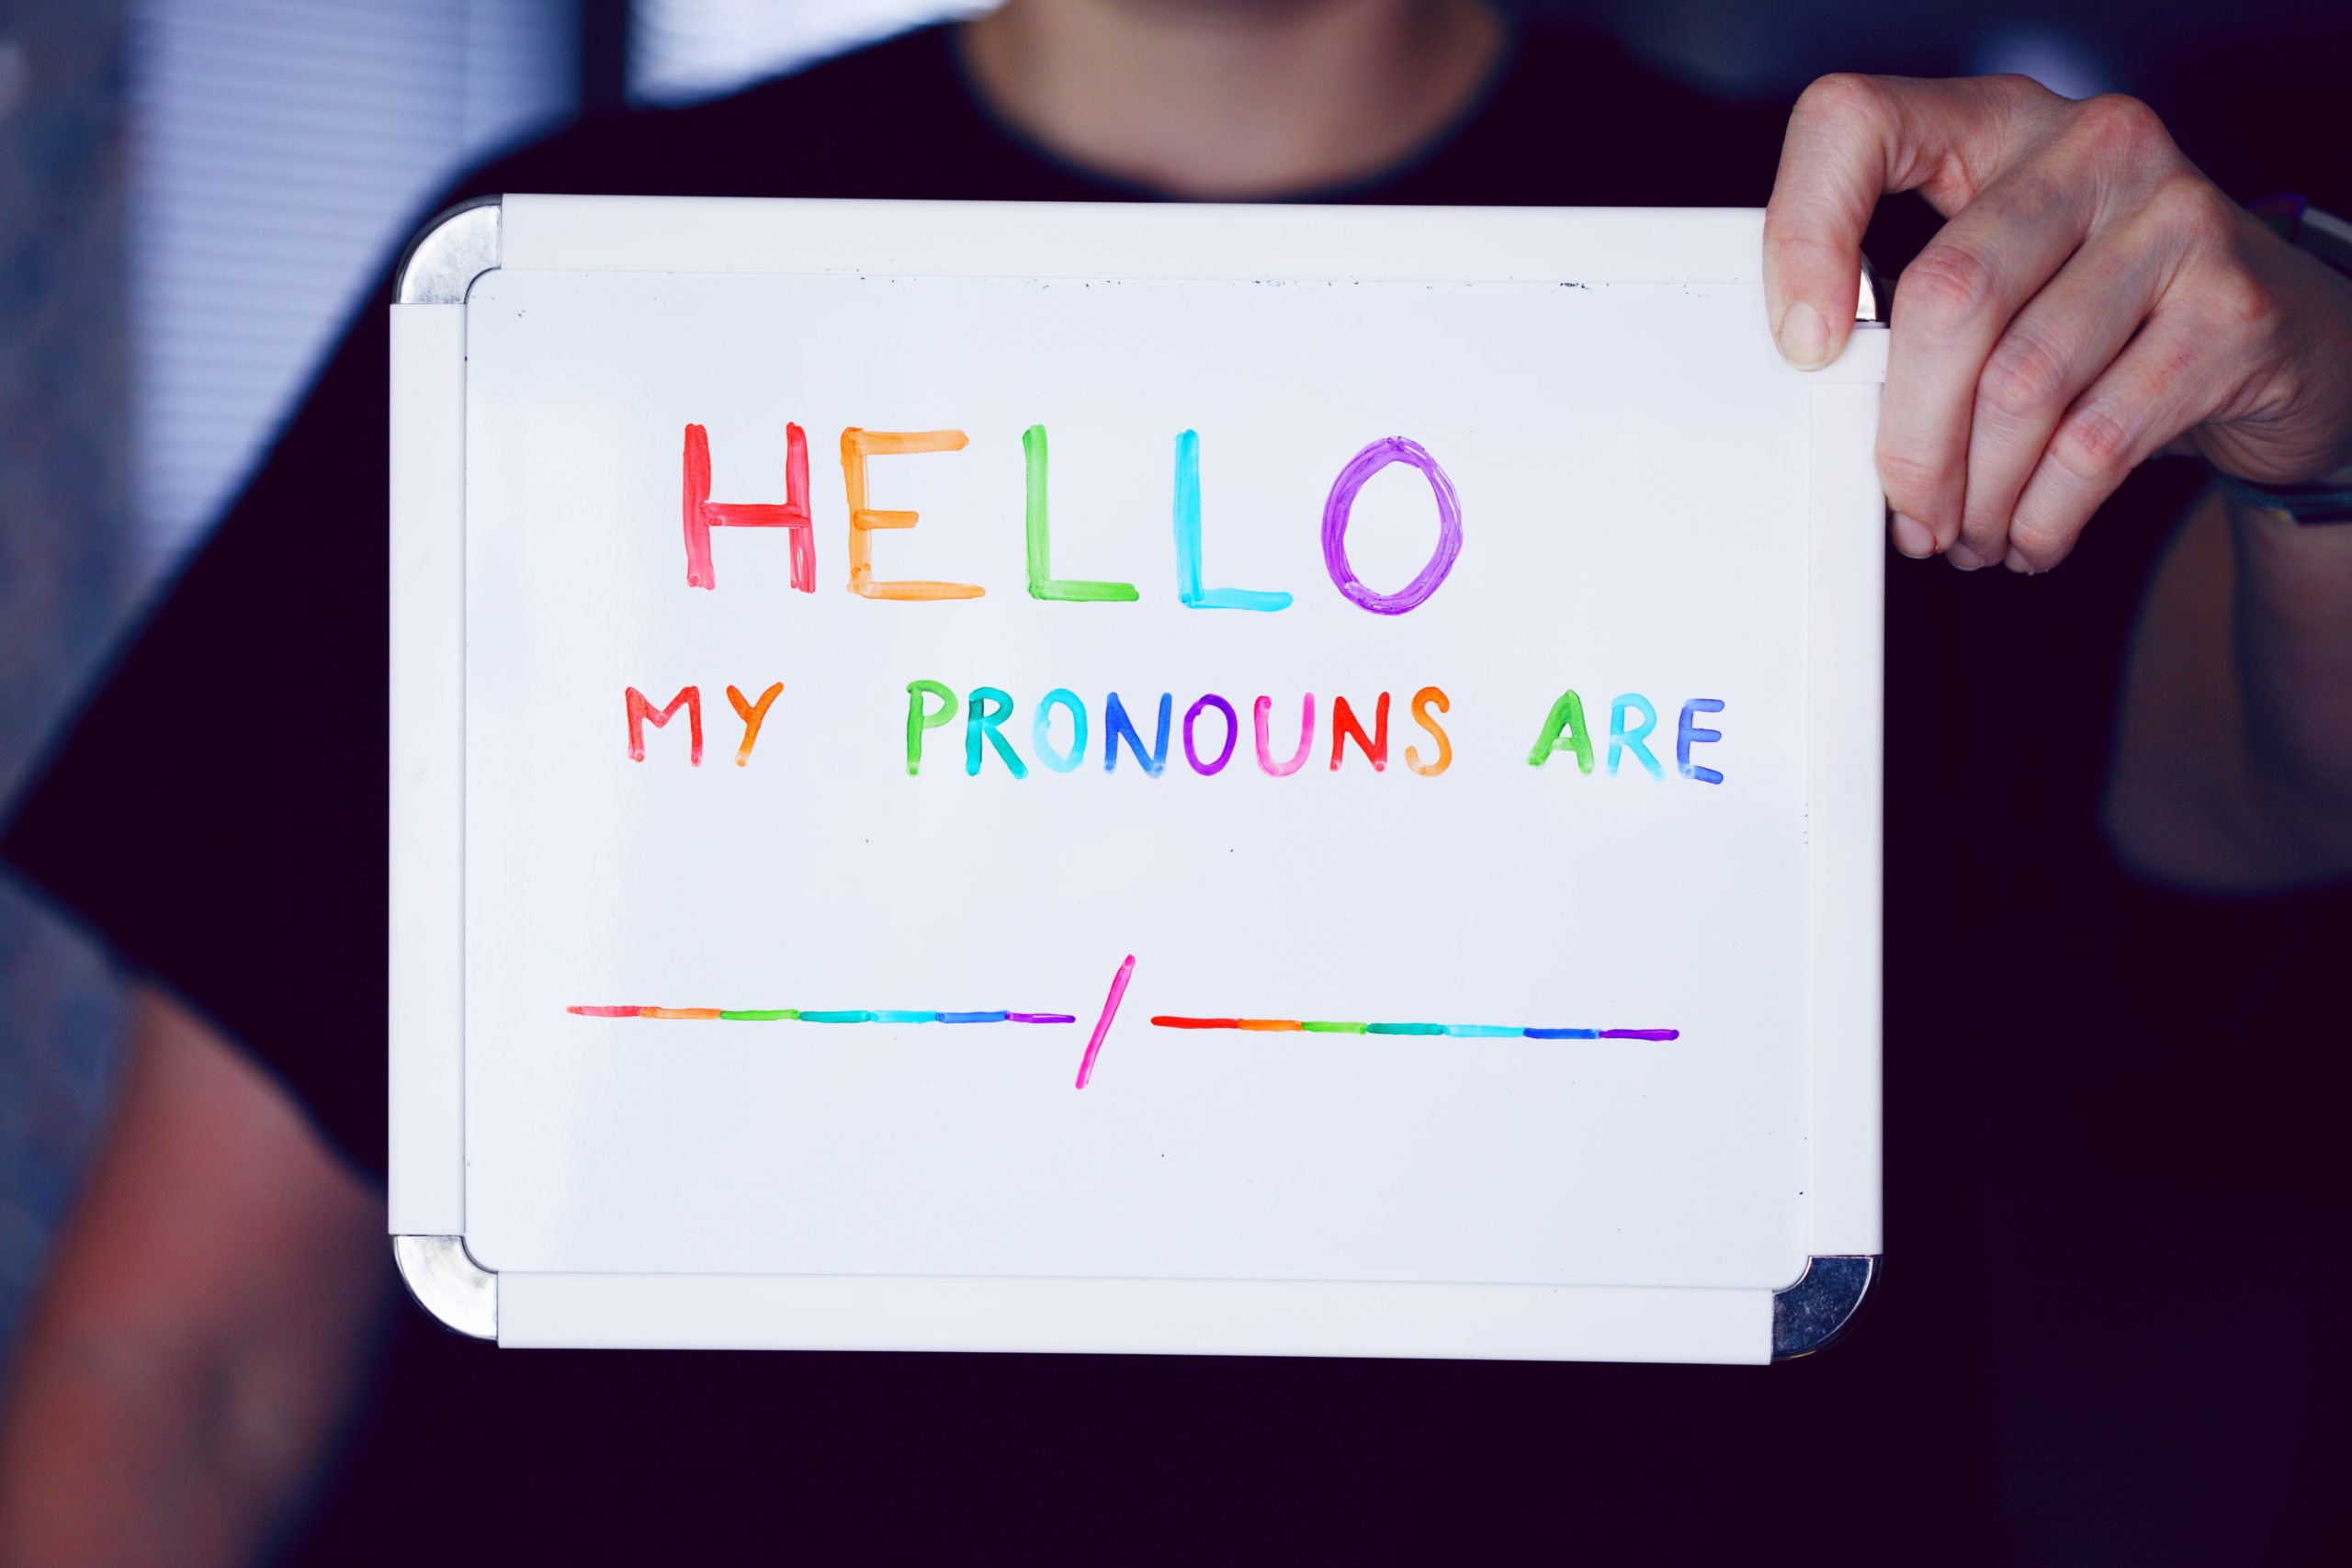 person holding sign that says "Hello my pronouns are"